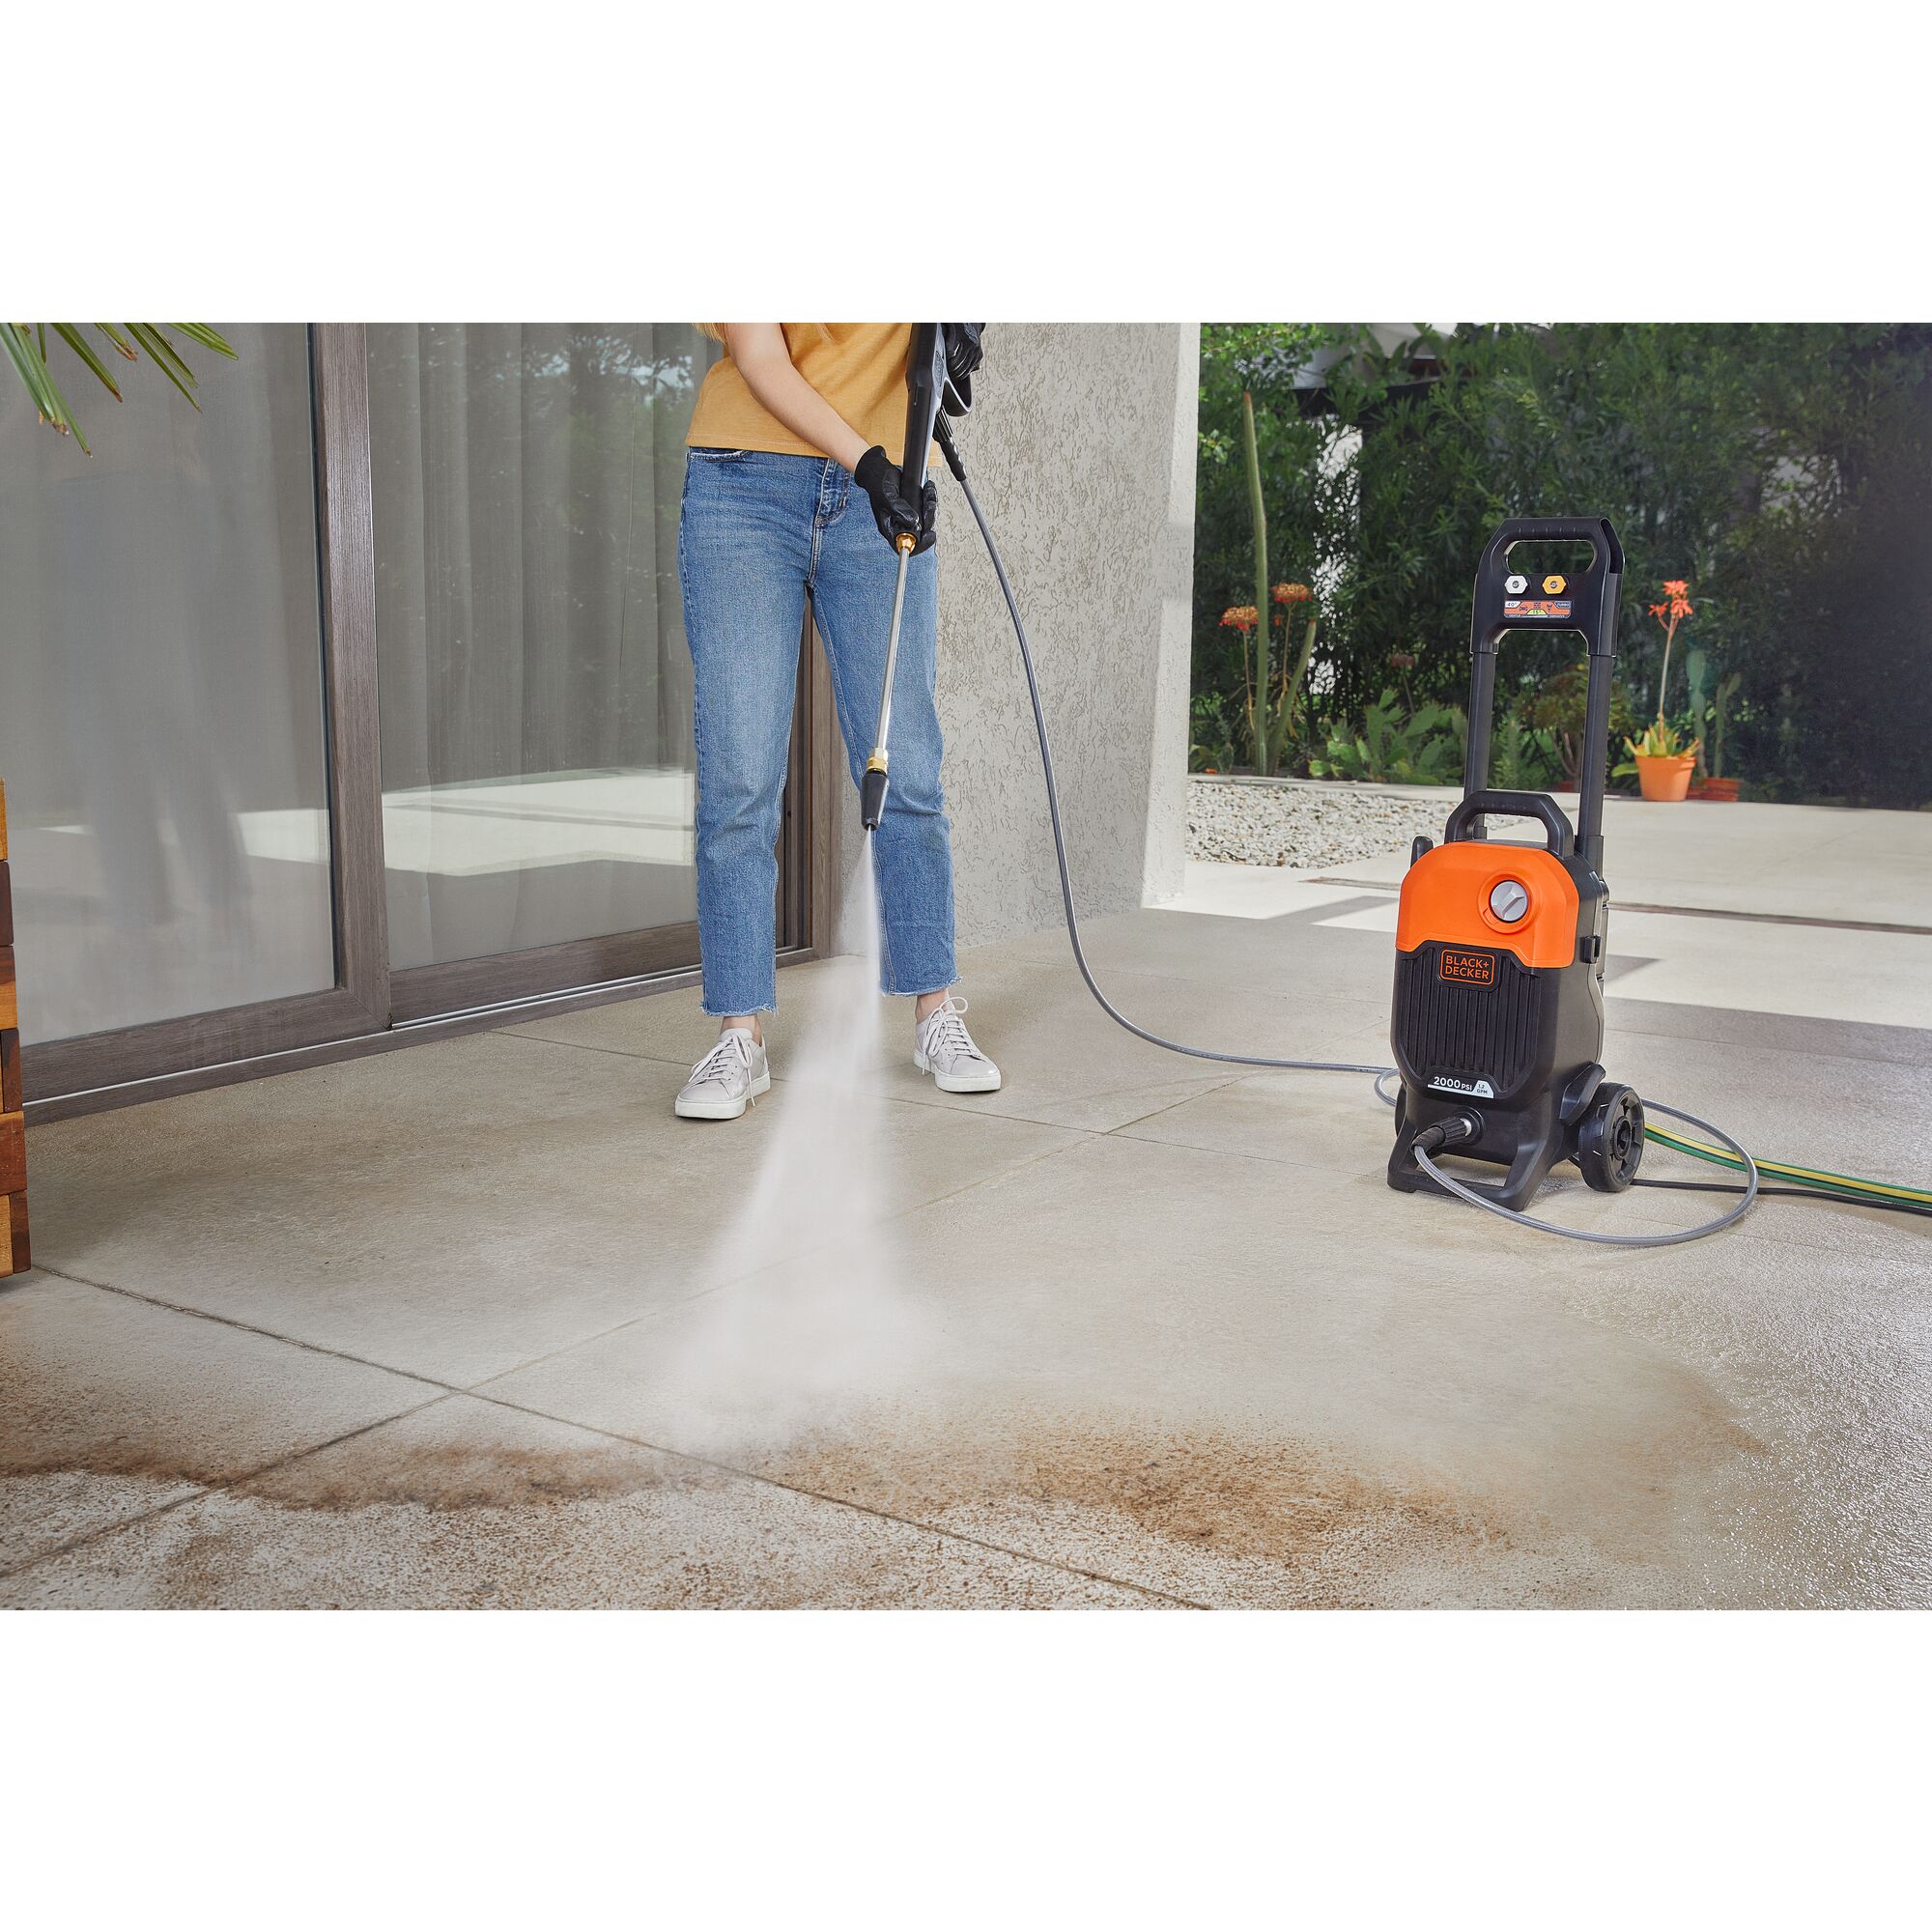 Woman shown from waist down cleaning off a dirty cement patio with the BLACK+DECKER 2,000 MAX psi* pressure washer with the turbo nozzle